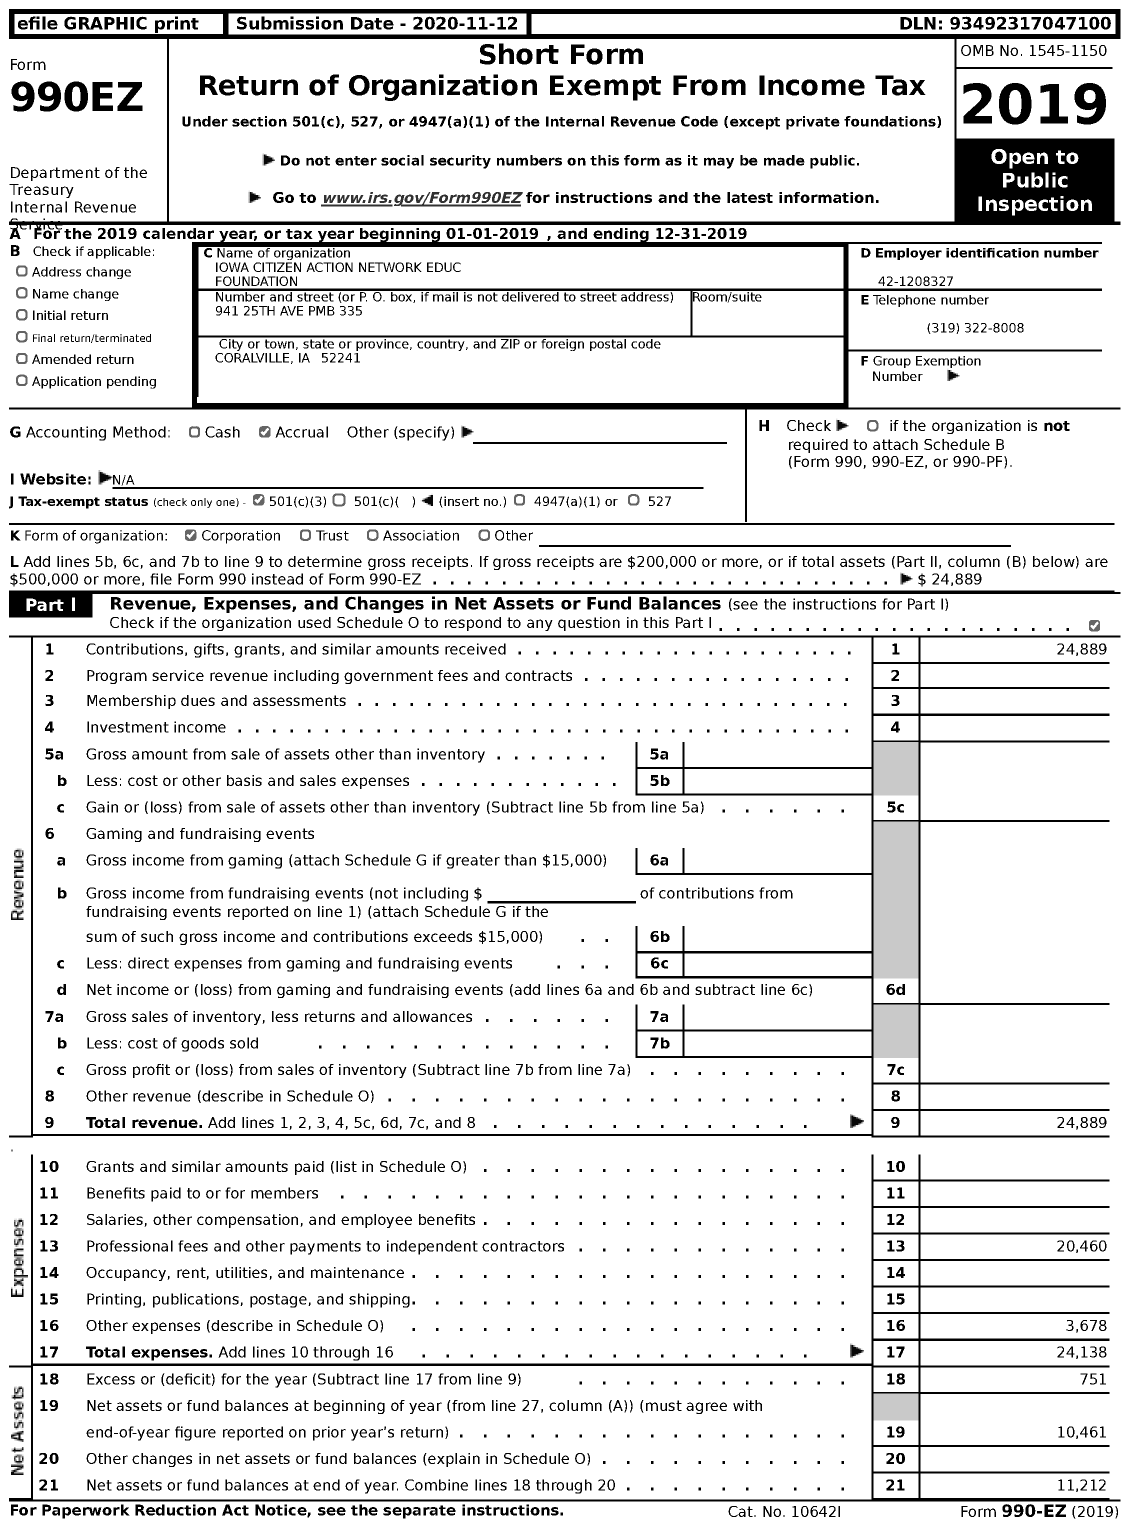 Image of first page of 2019 Form 990EZ for Iowa Citizen Action Network Educ Foundation